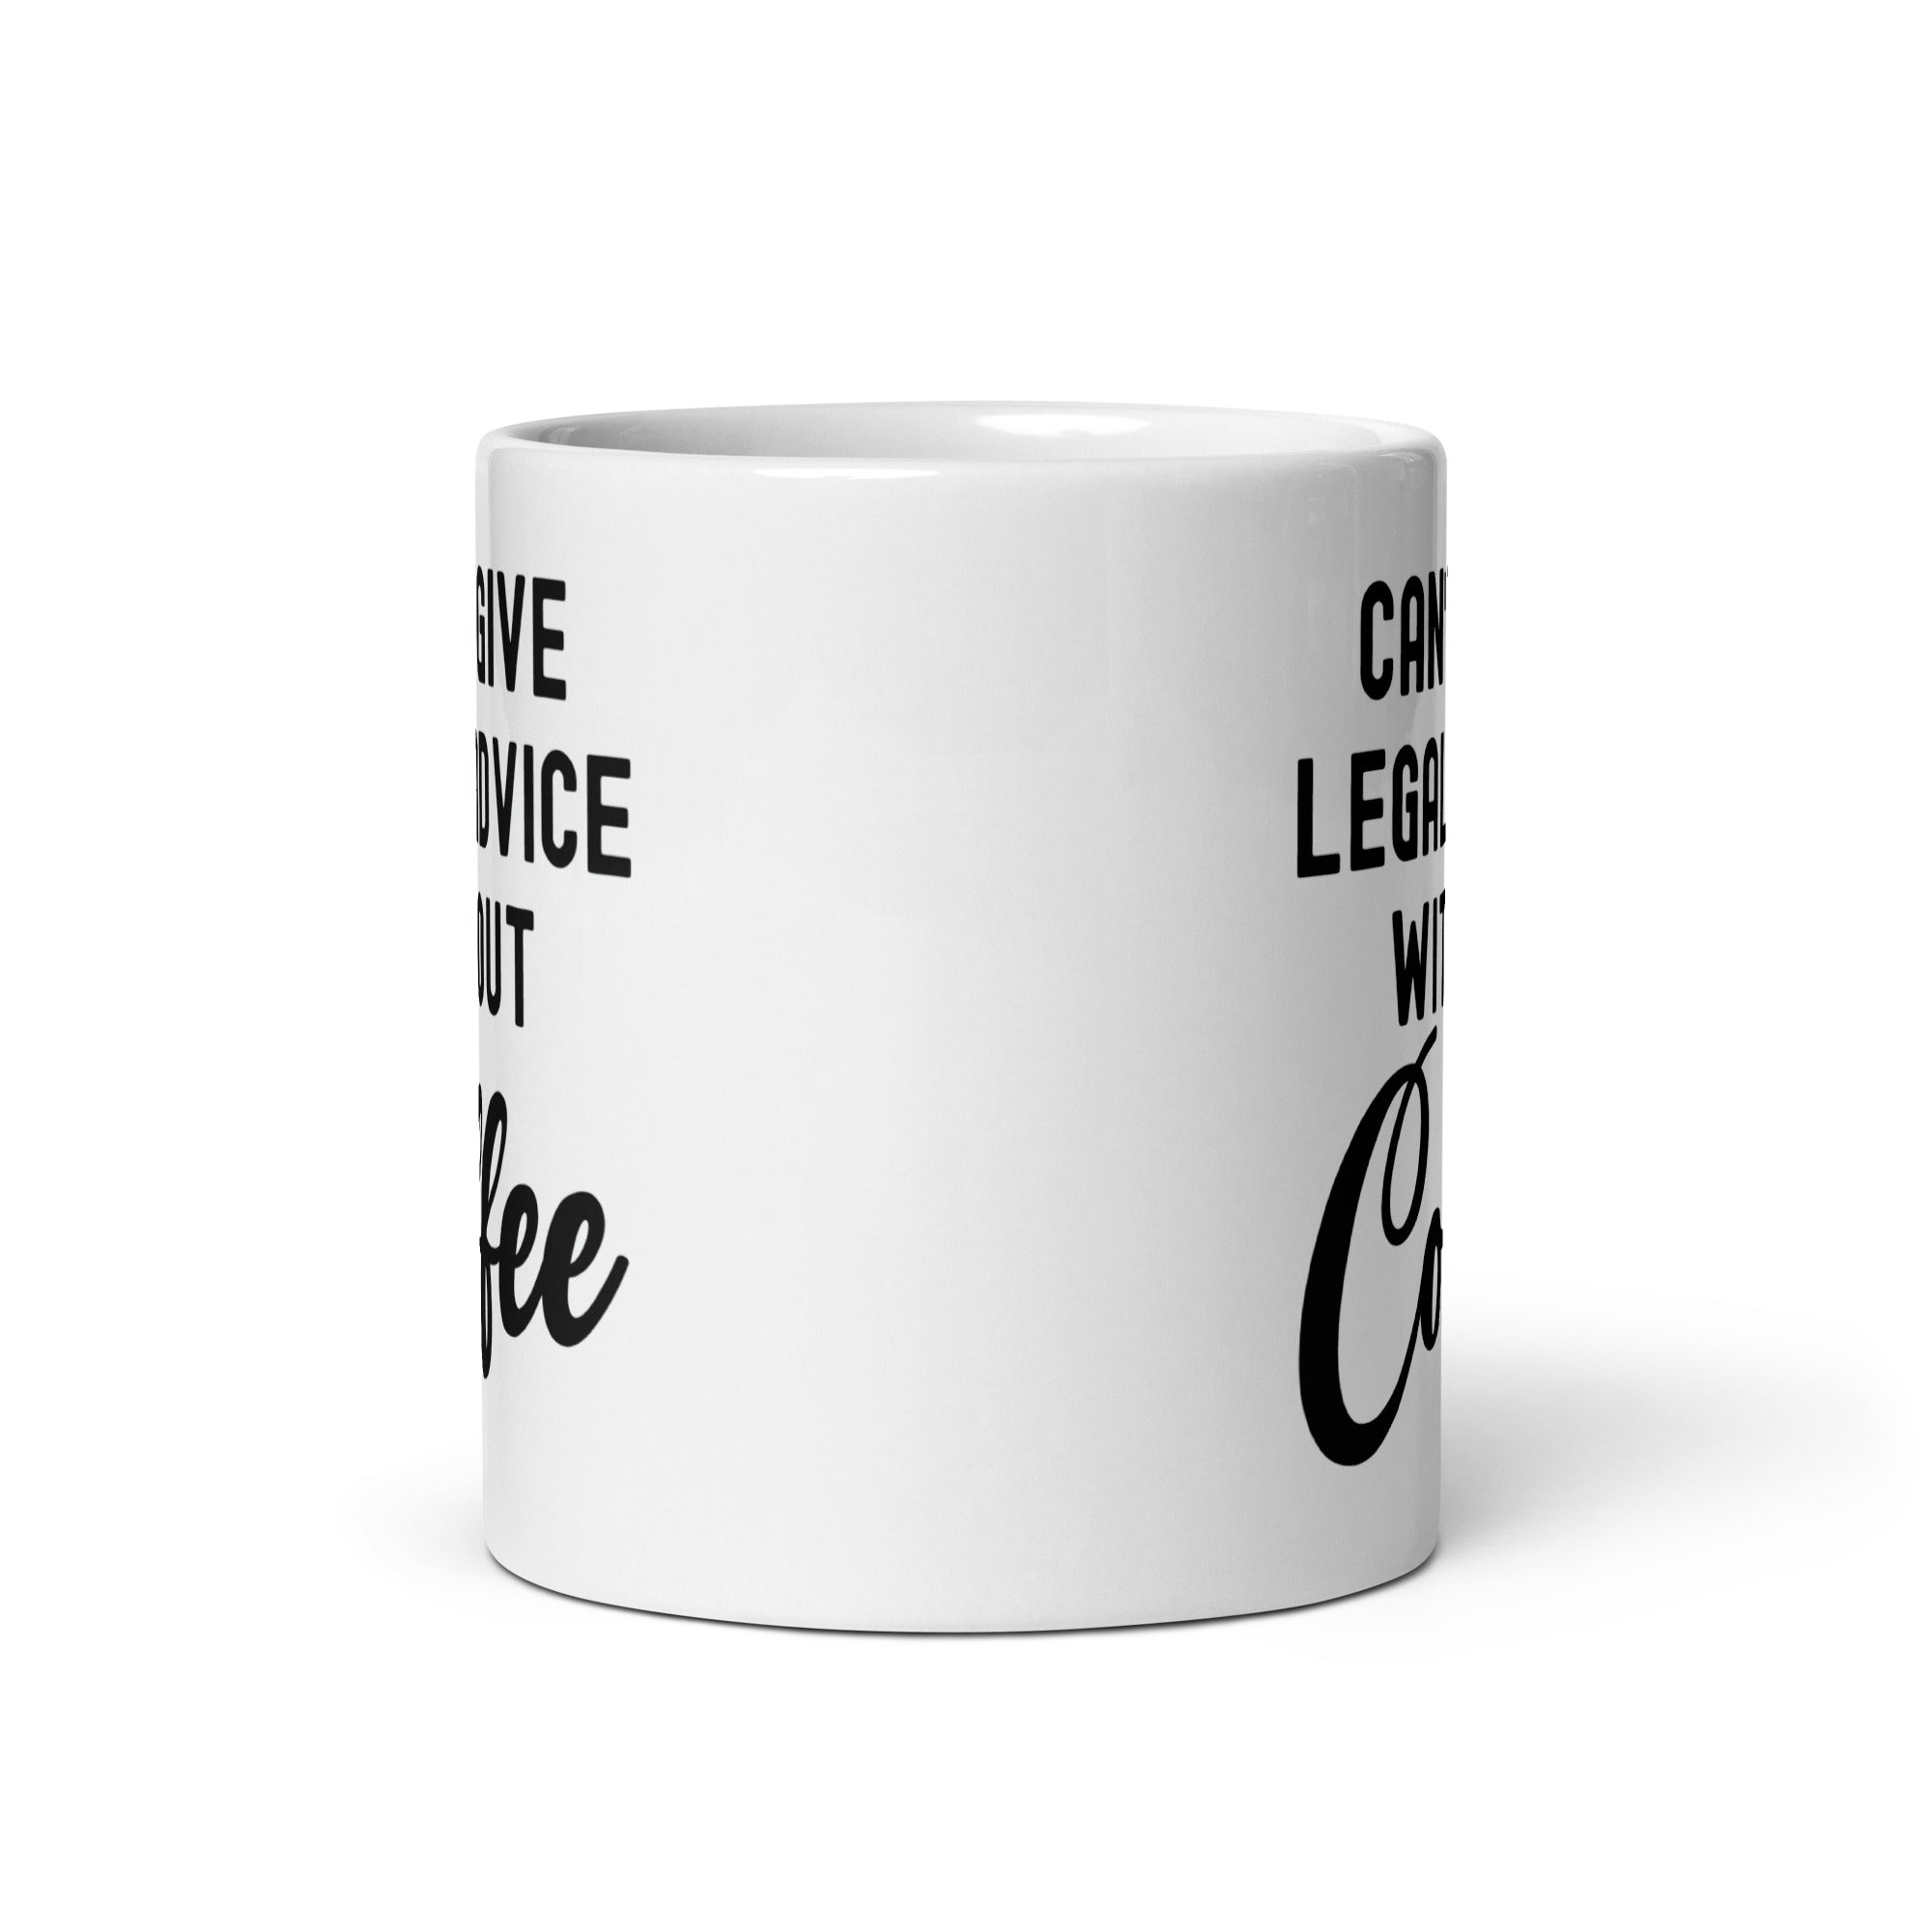 White glossy mug | Can’t give legal advice without coffee